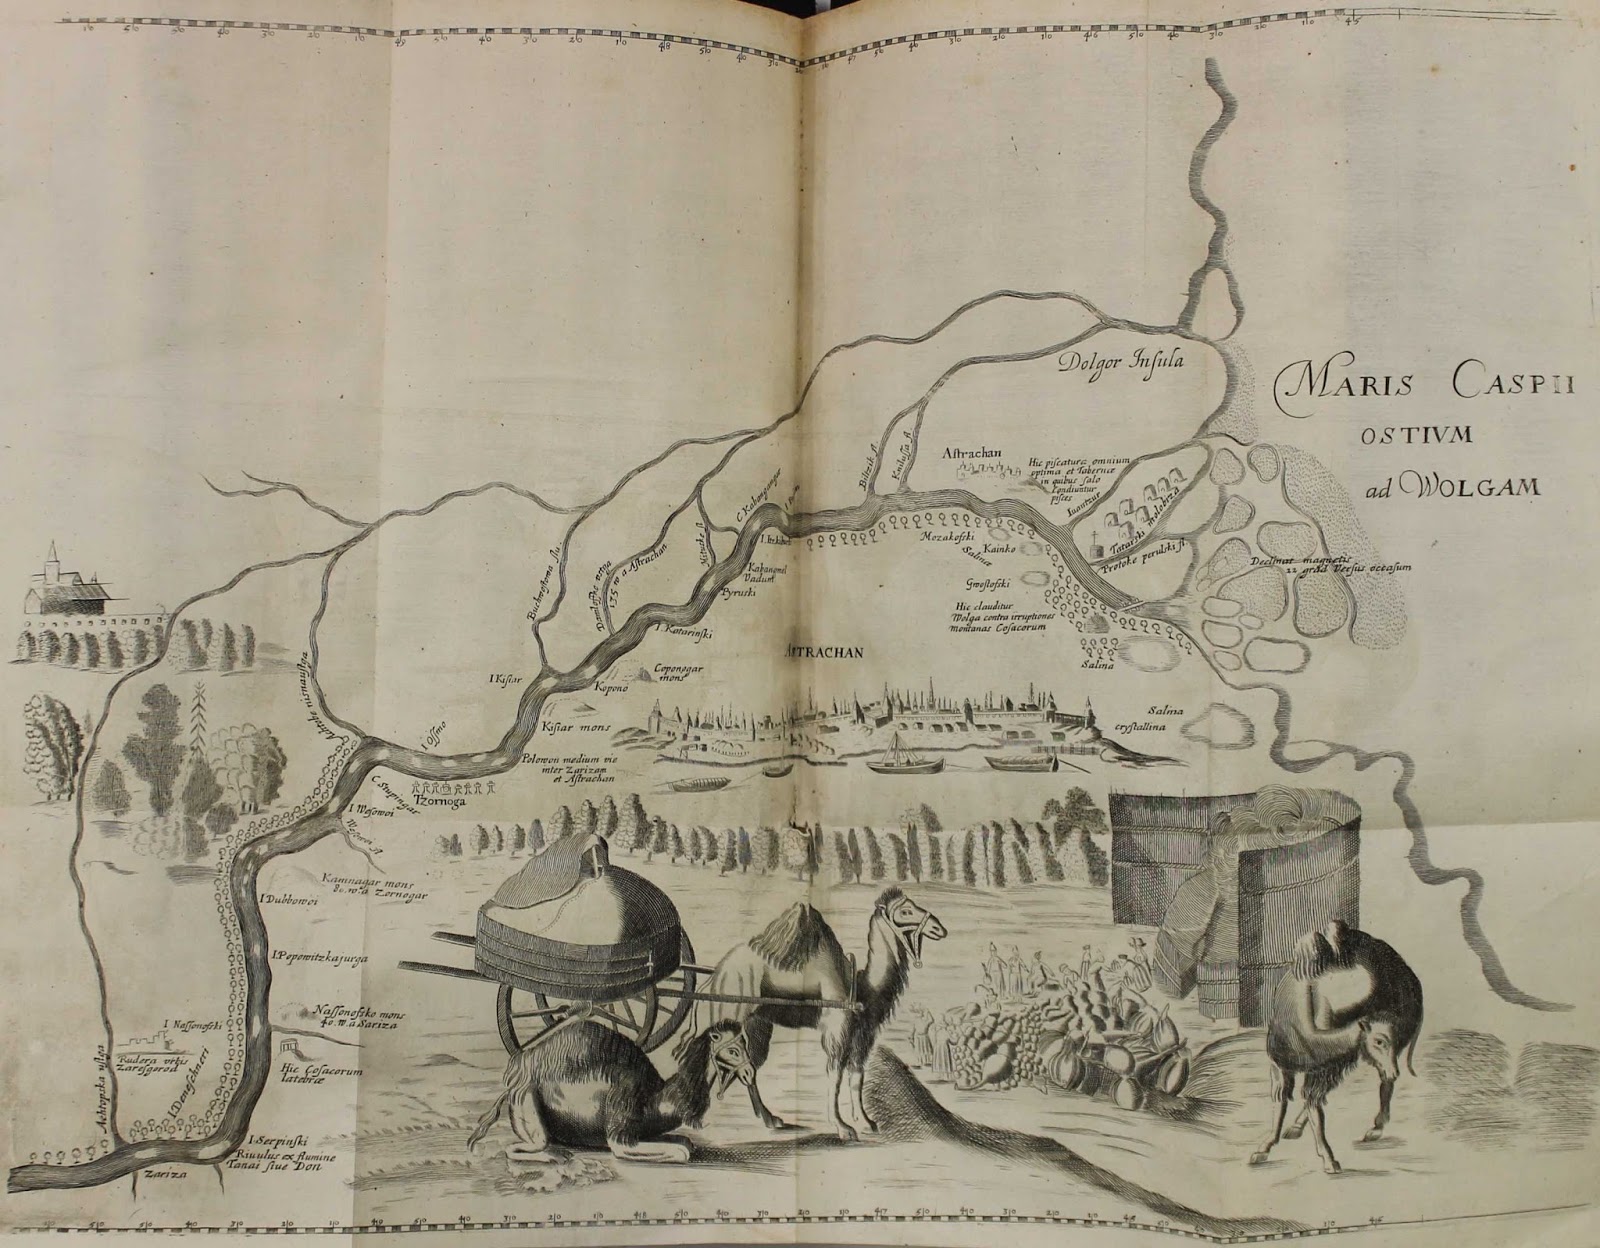 Map withg illustrations including camels in the foreground